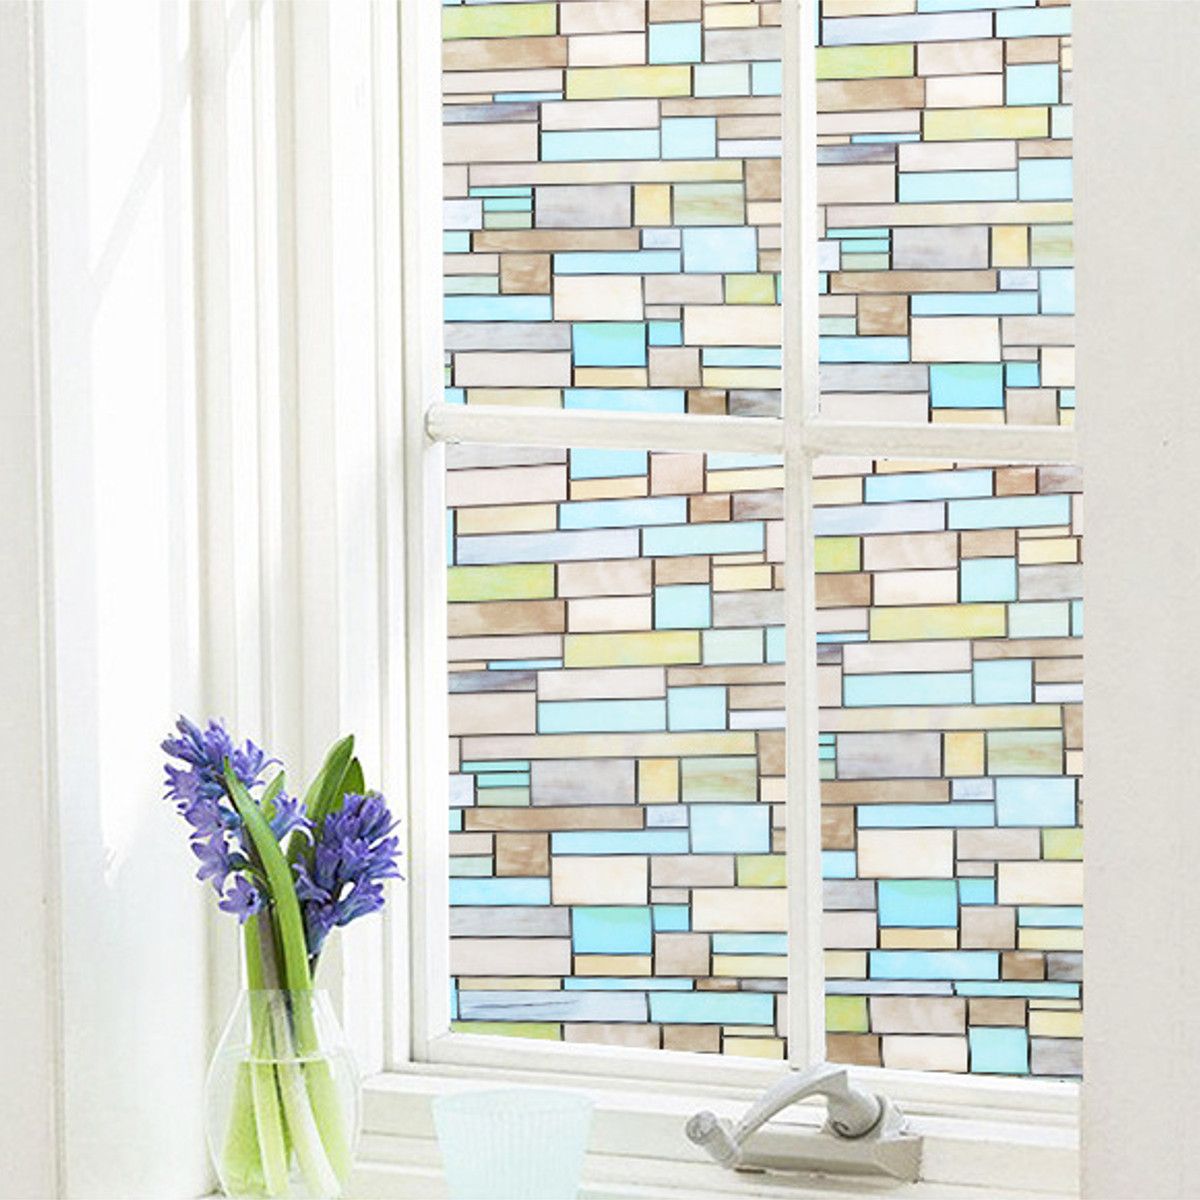 2m-Brick-Static-Cling-Cover-Frosted-Window-Glass-Film-Sticker-Privacy-Home-Decor-1458257